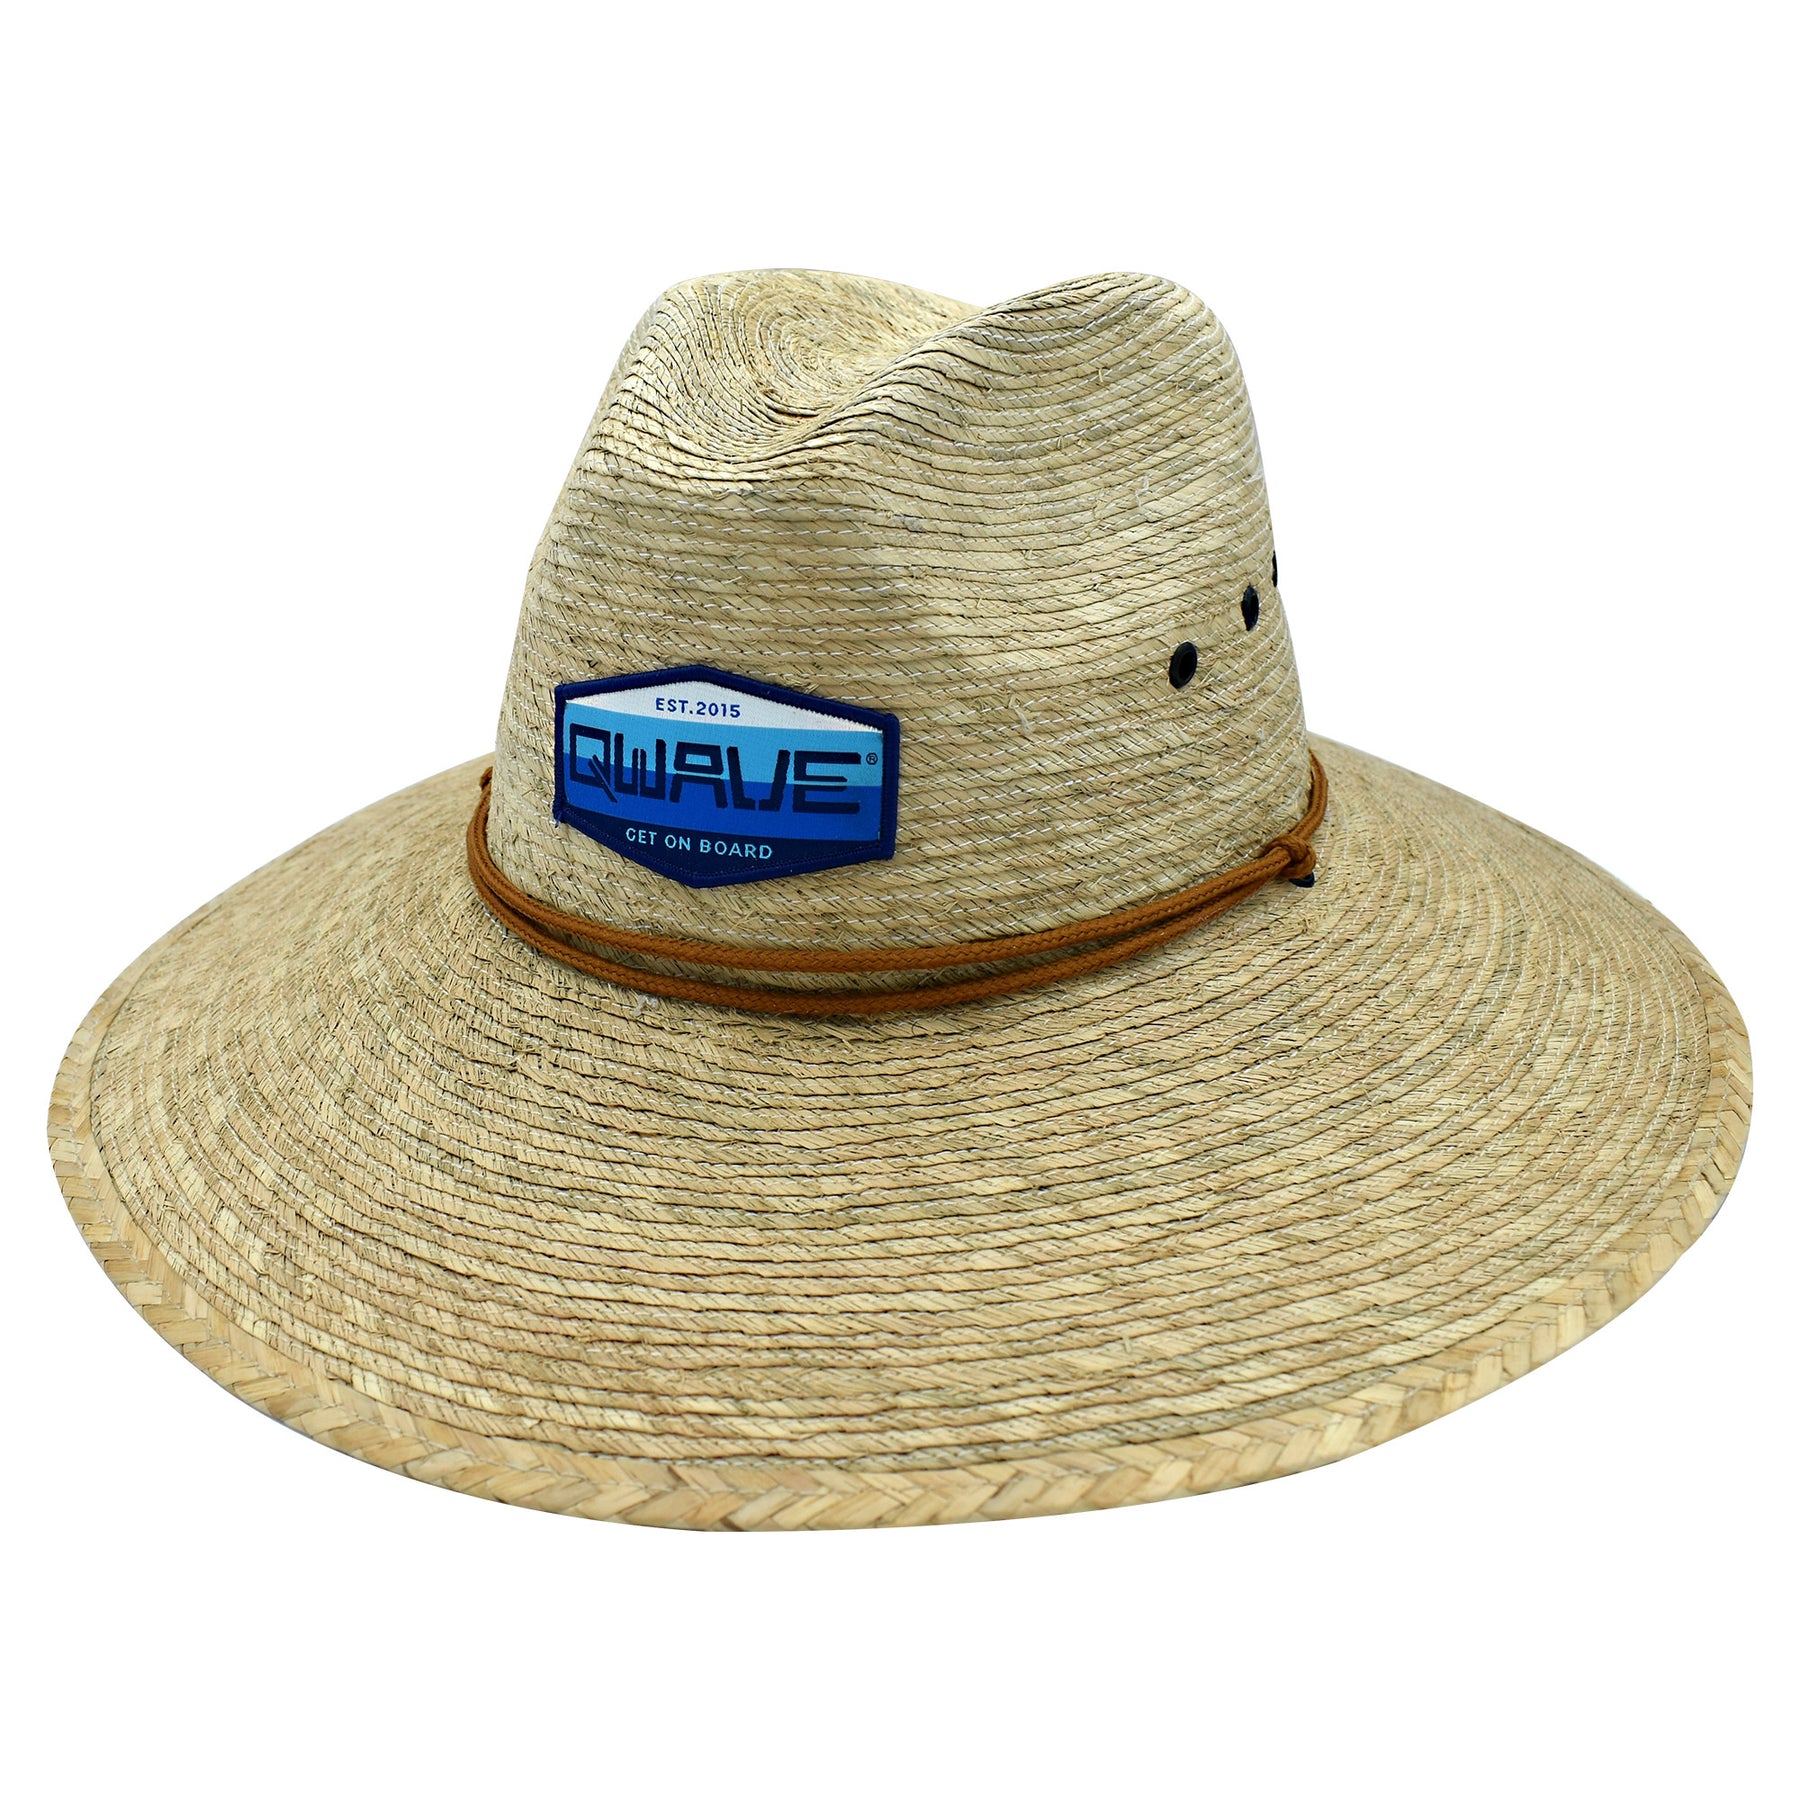 Qwave Packable Stone-Washed Straw Lifeguard Hat for Men and Women - Beach Straw  Hat Protects from Summer Sun - Ocean Blues